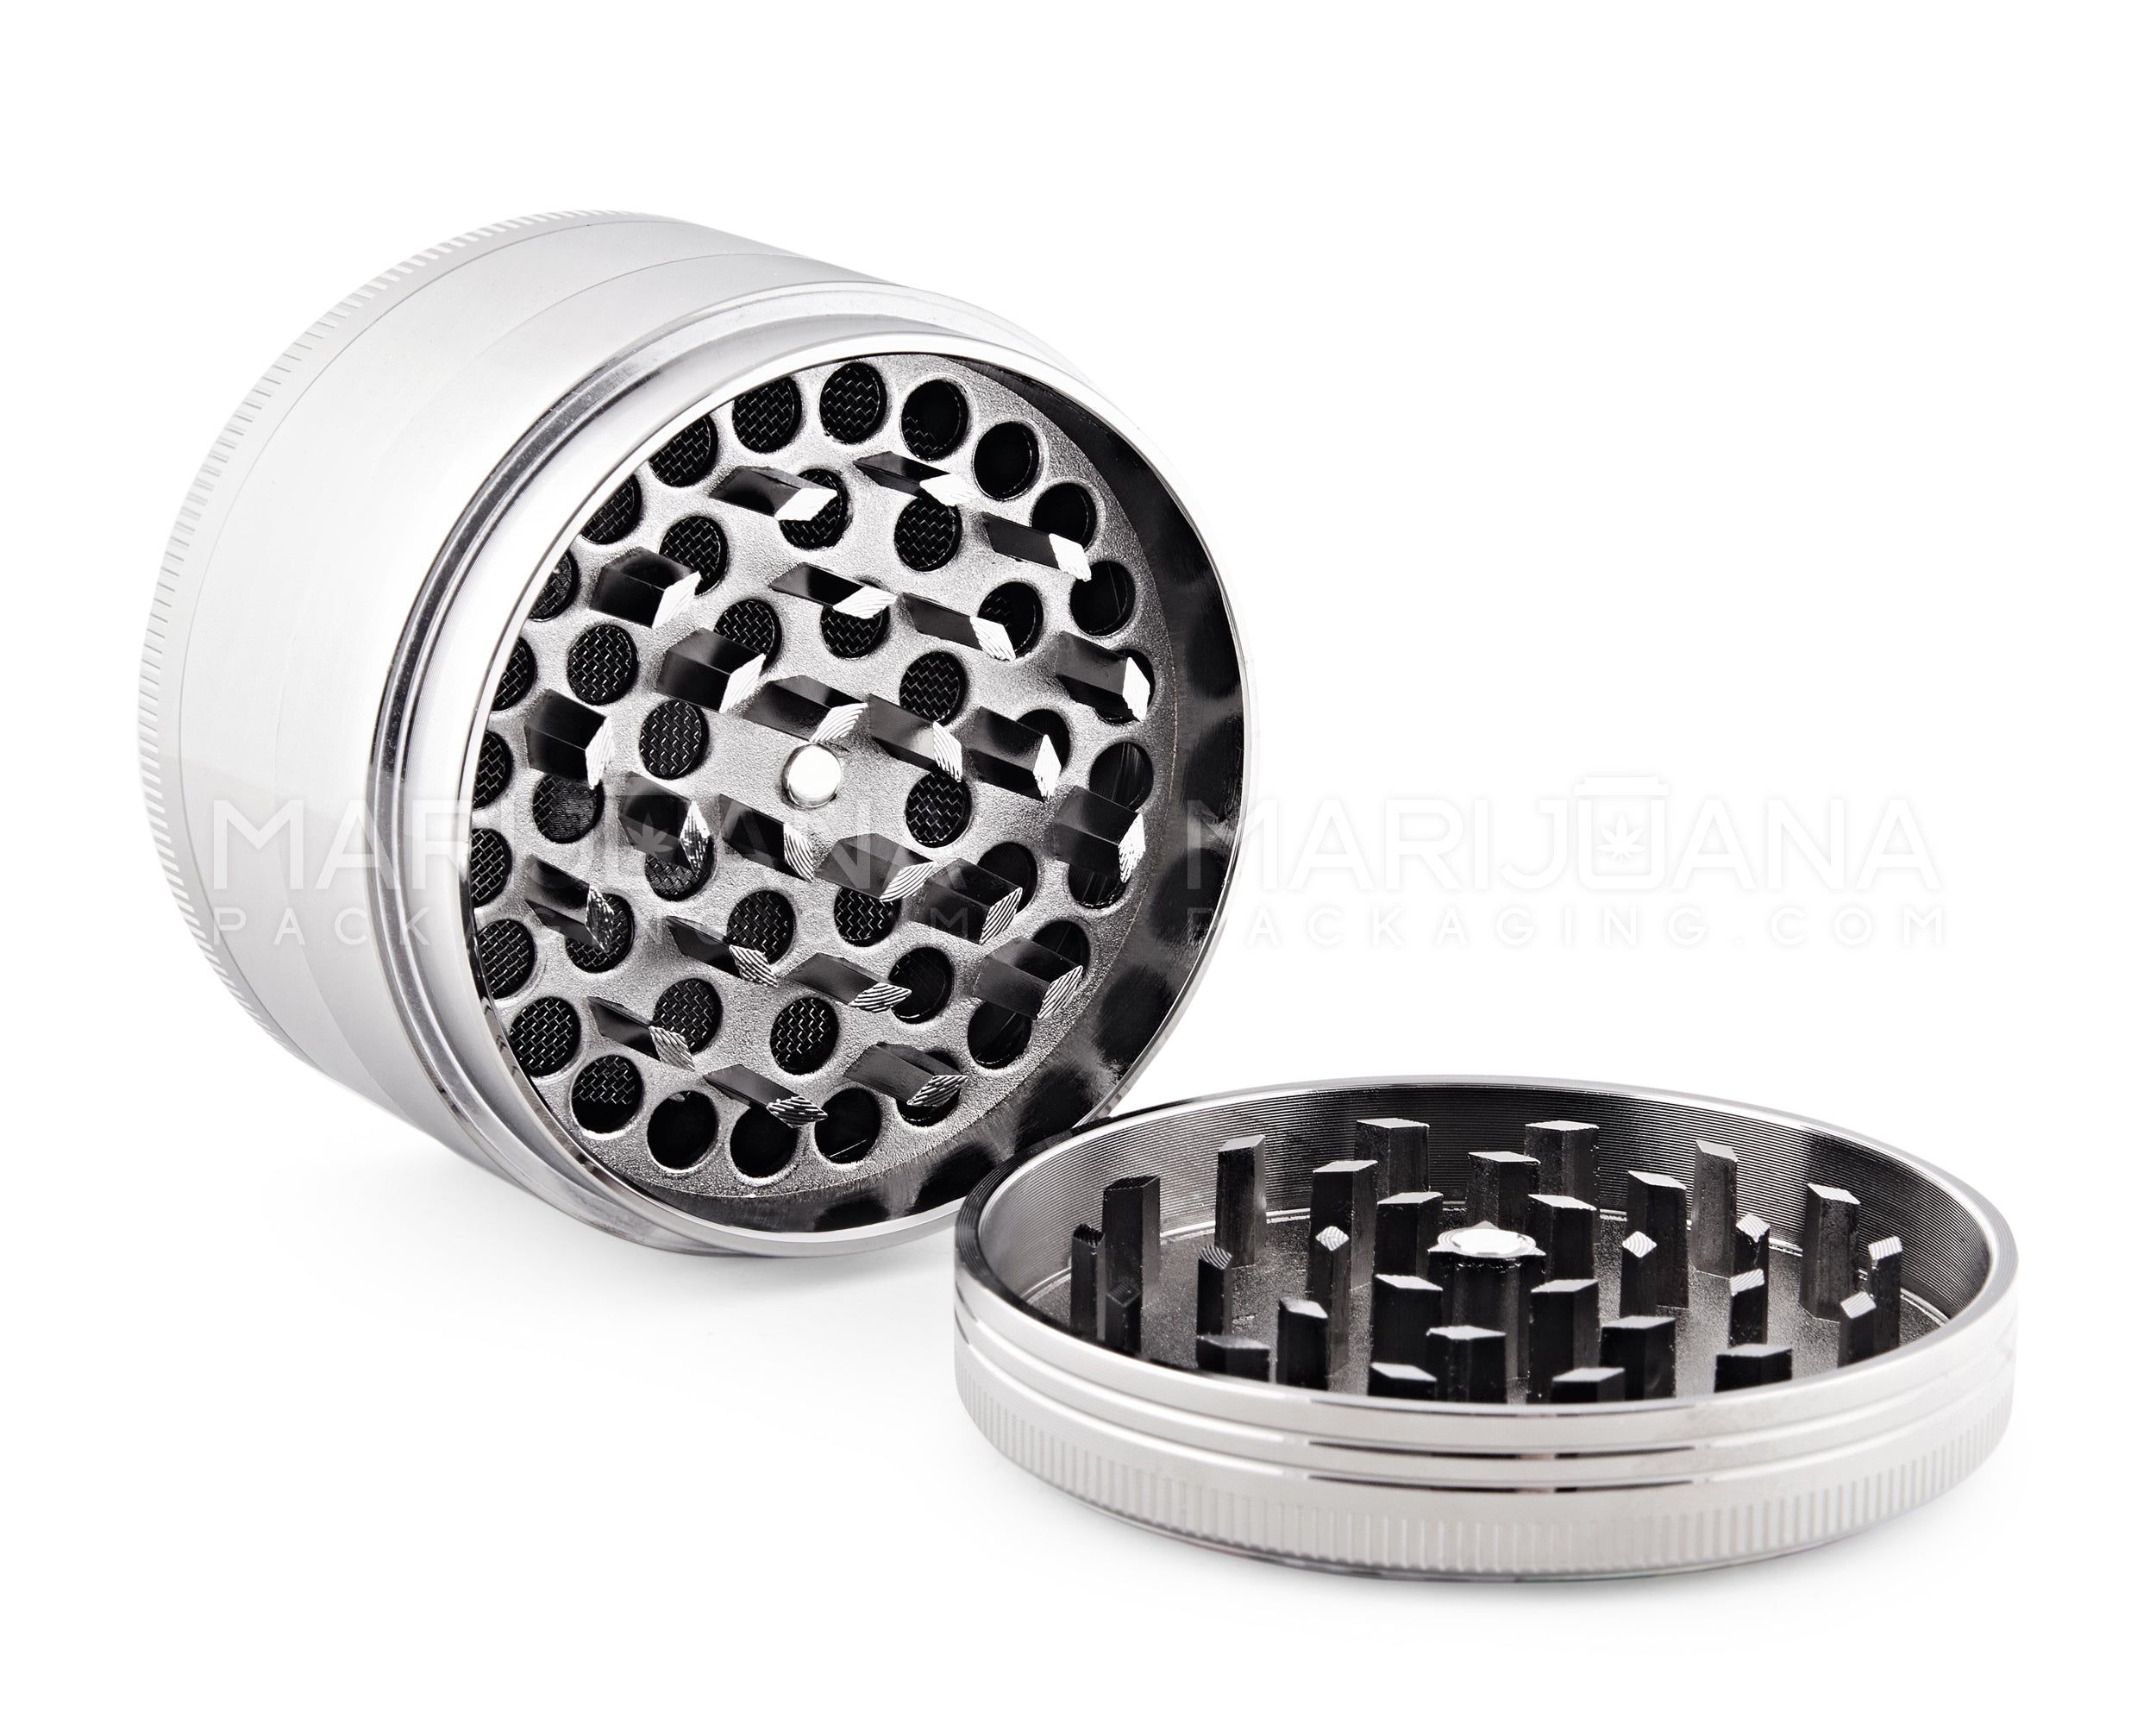 Catch, Attachment for Herb Grinder